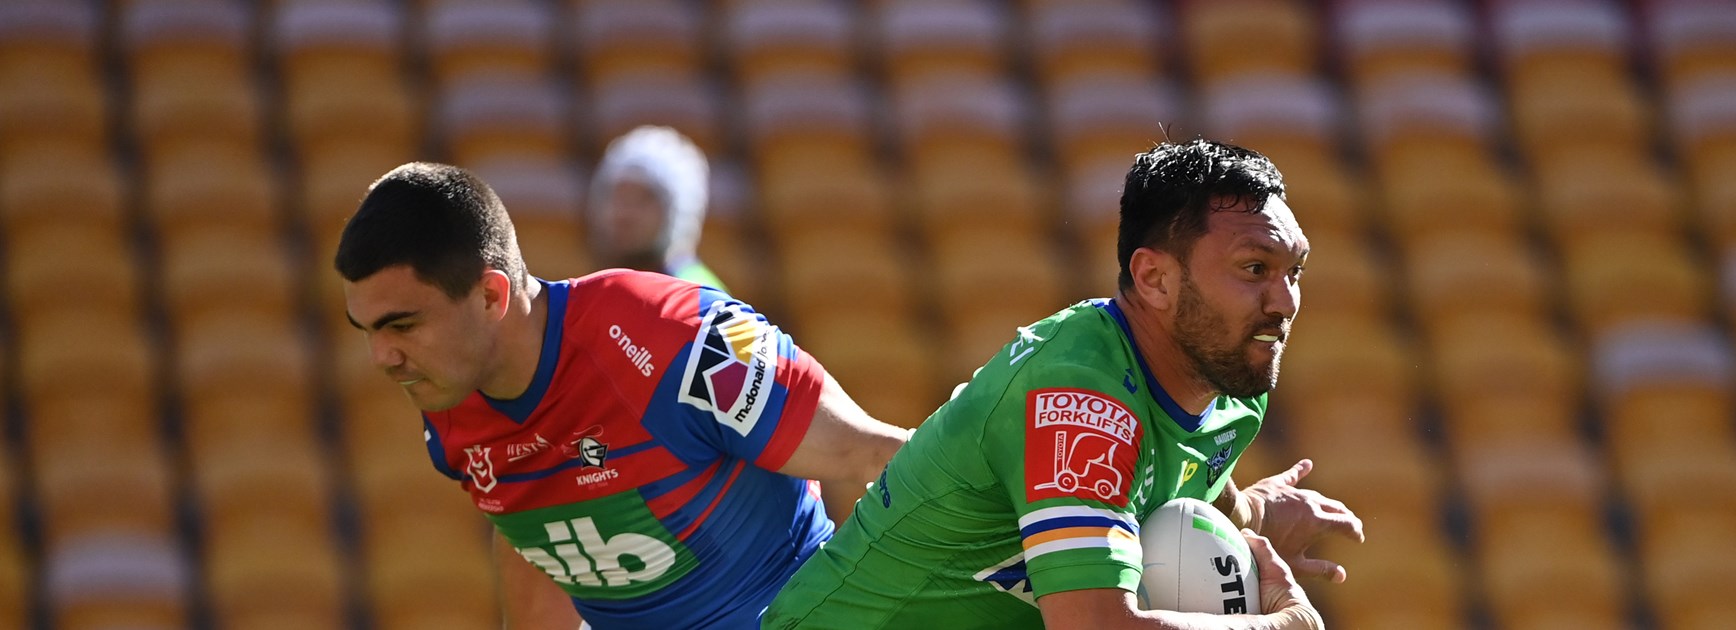 NRL Match Report: Knights too strong for Raiders